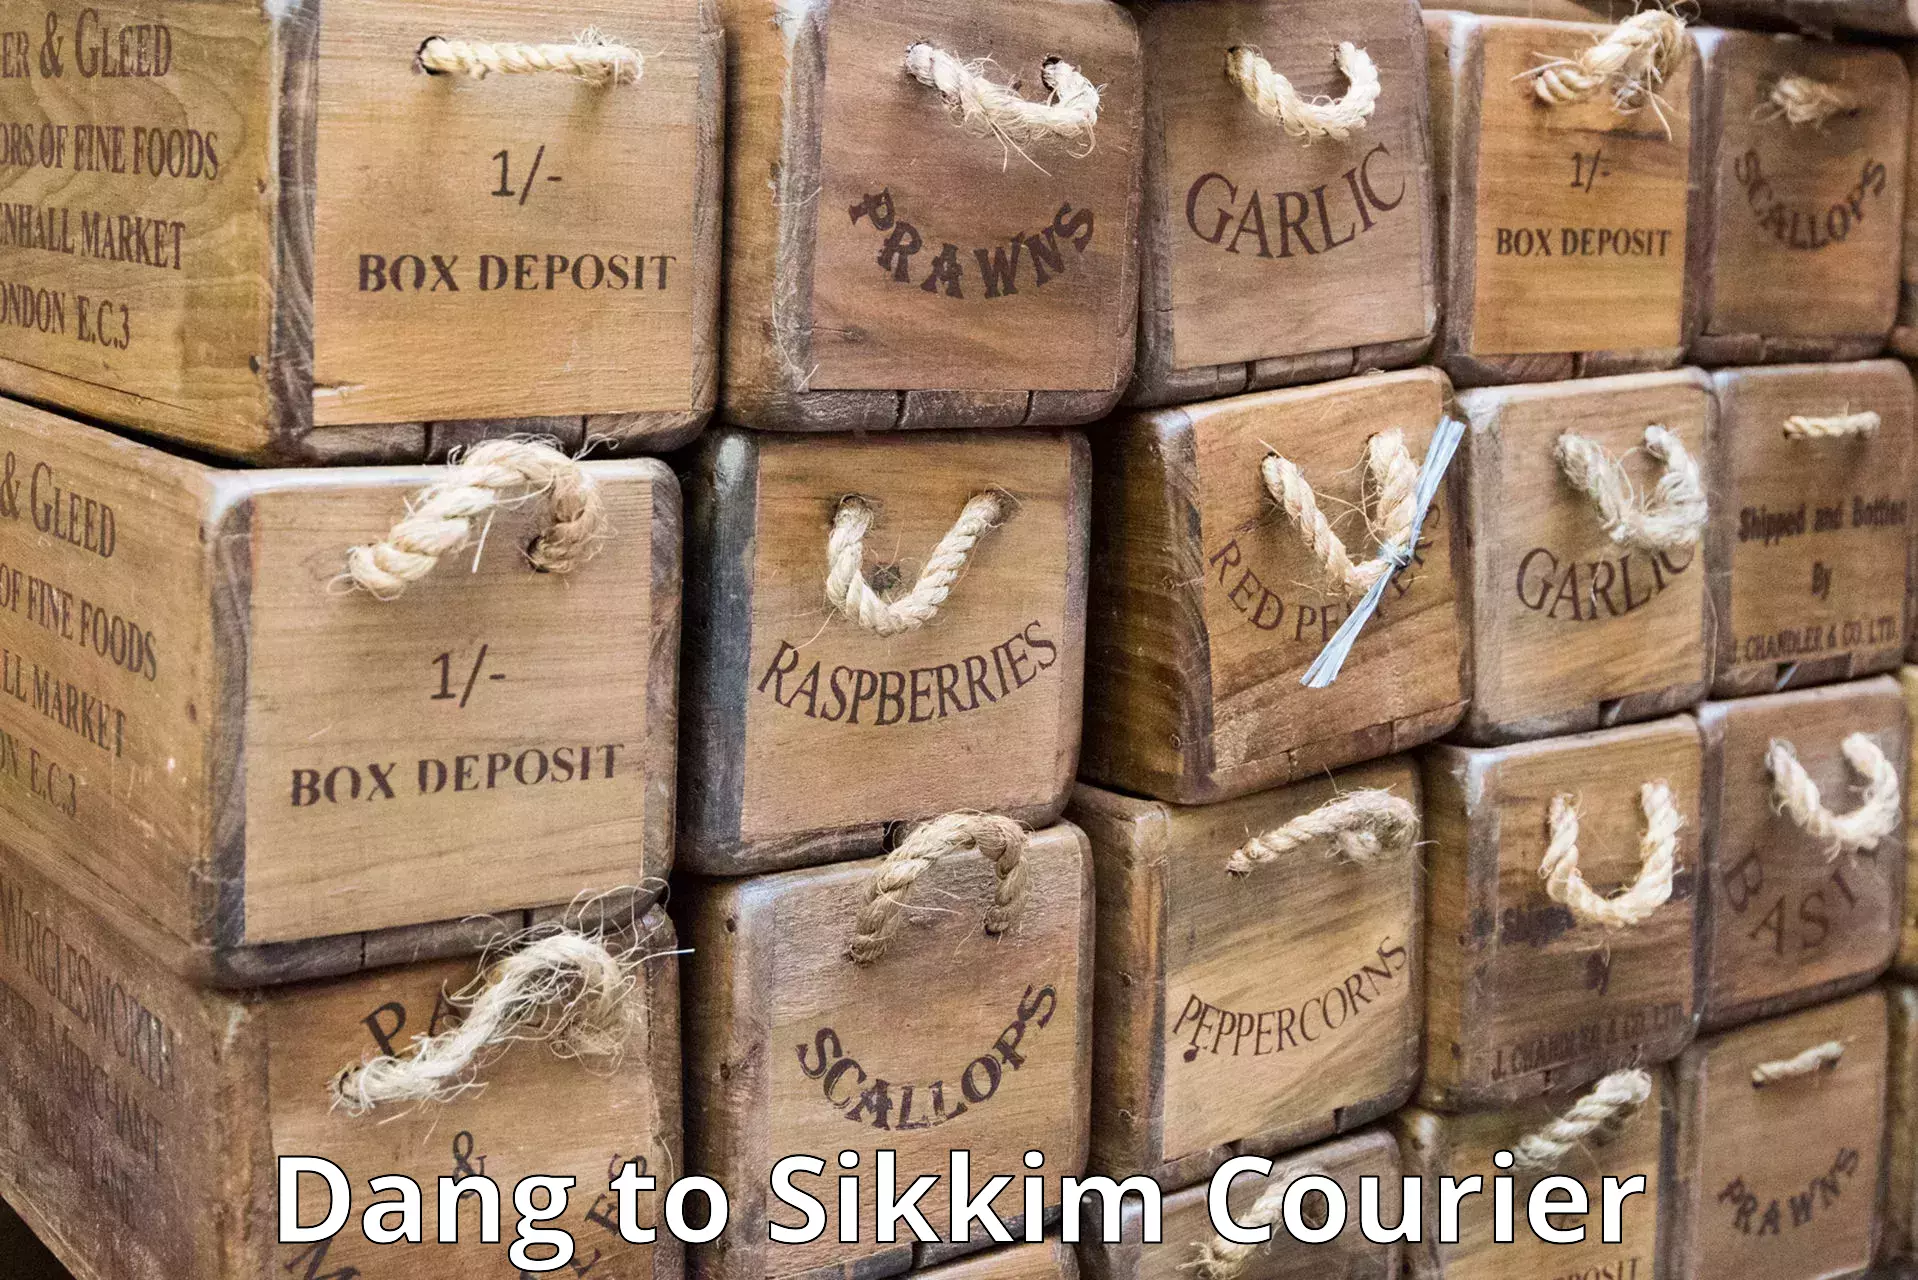 Efficient order fulfillment Dang to West Sikkim